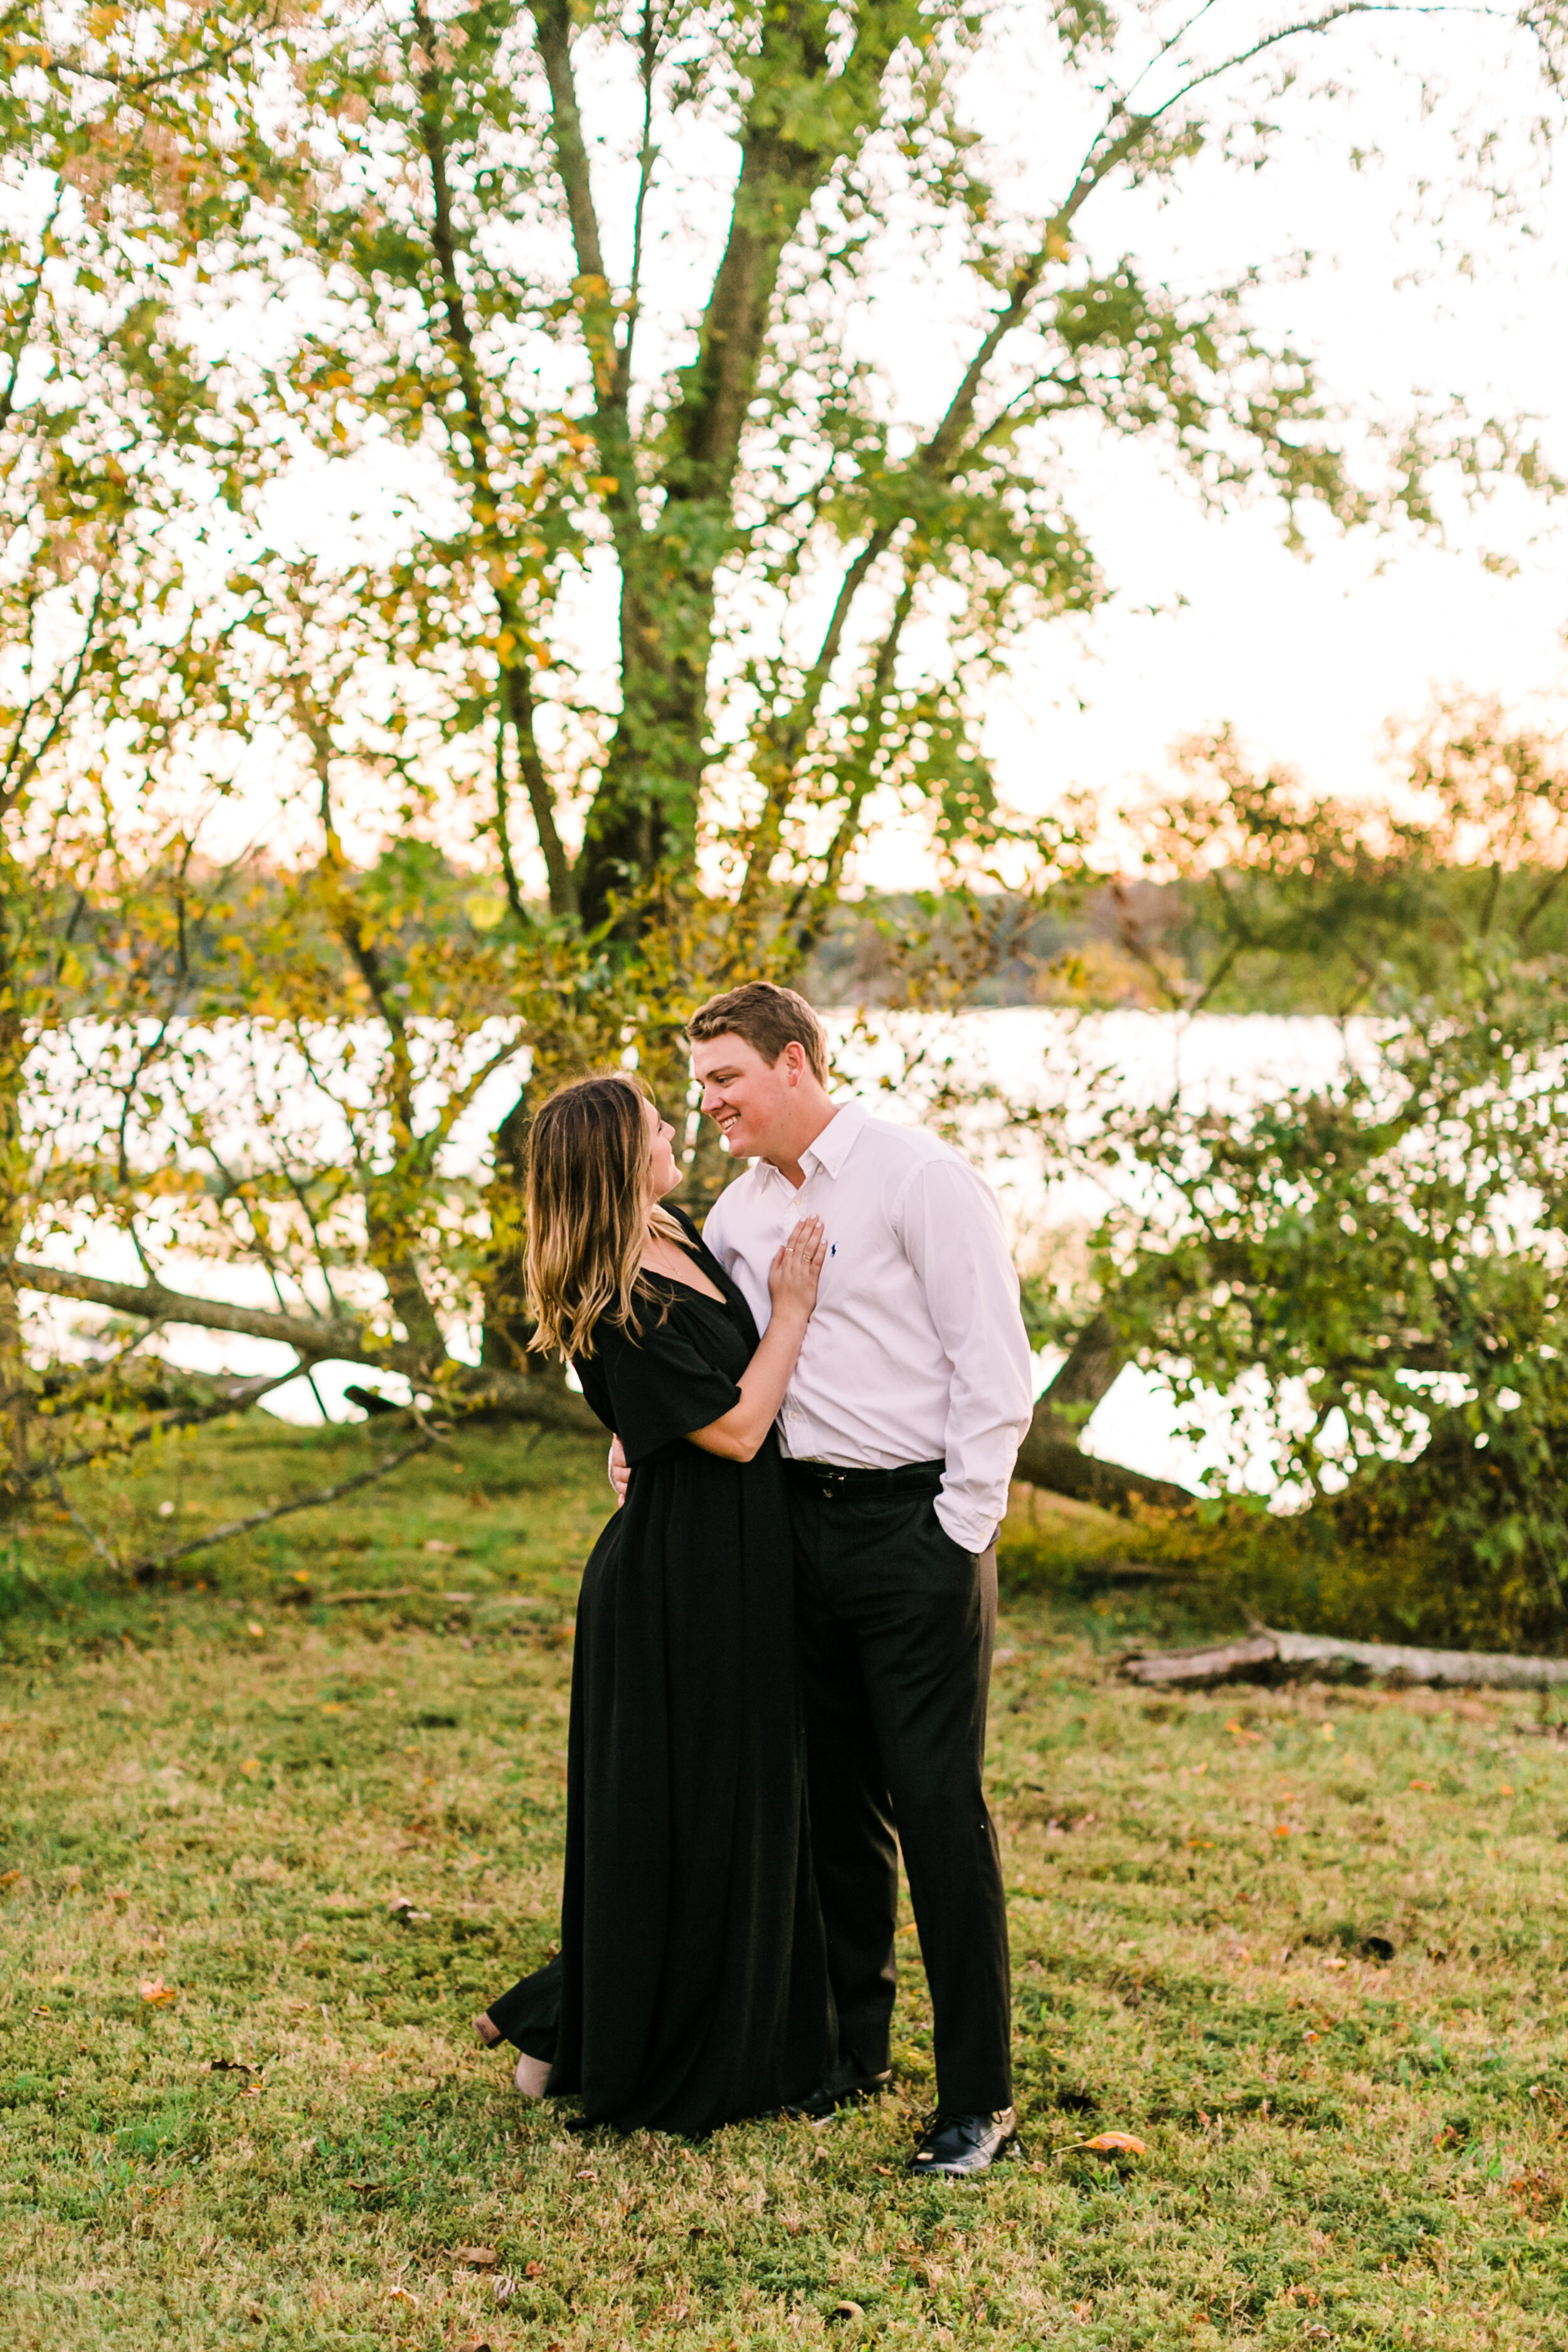 Tennessee+Fall+Engagement+Photos+Puppy (57 of 63).jpg